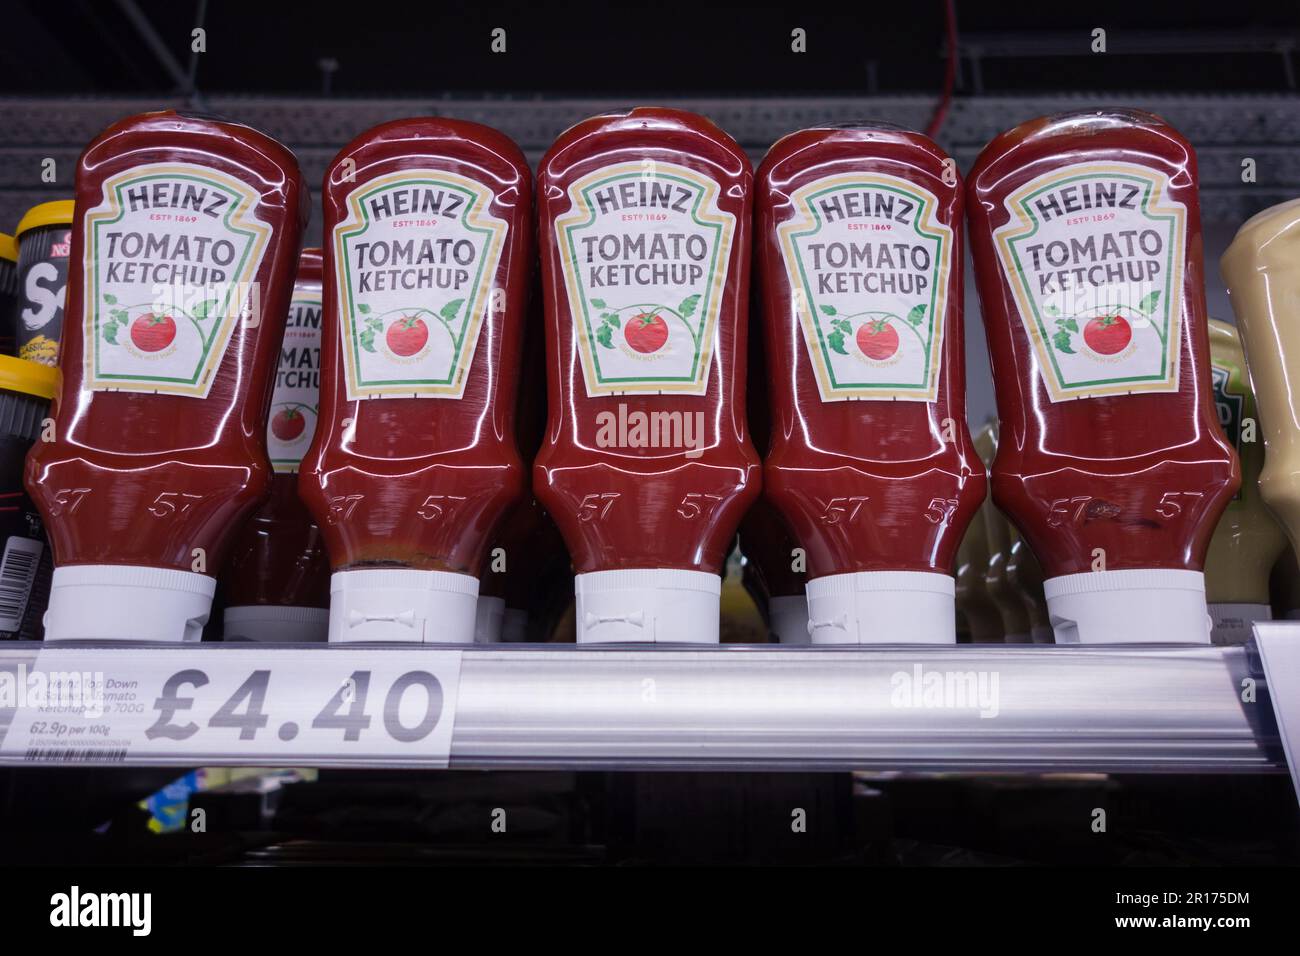 A row of Plastic Heinz Tomato Ketchup bottles on a supermarket shelf Stock Photo